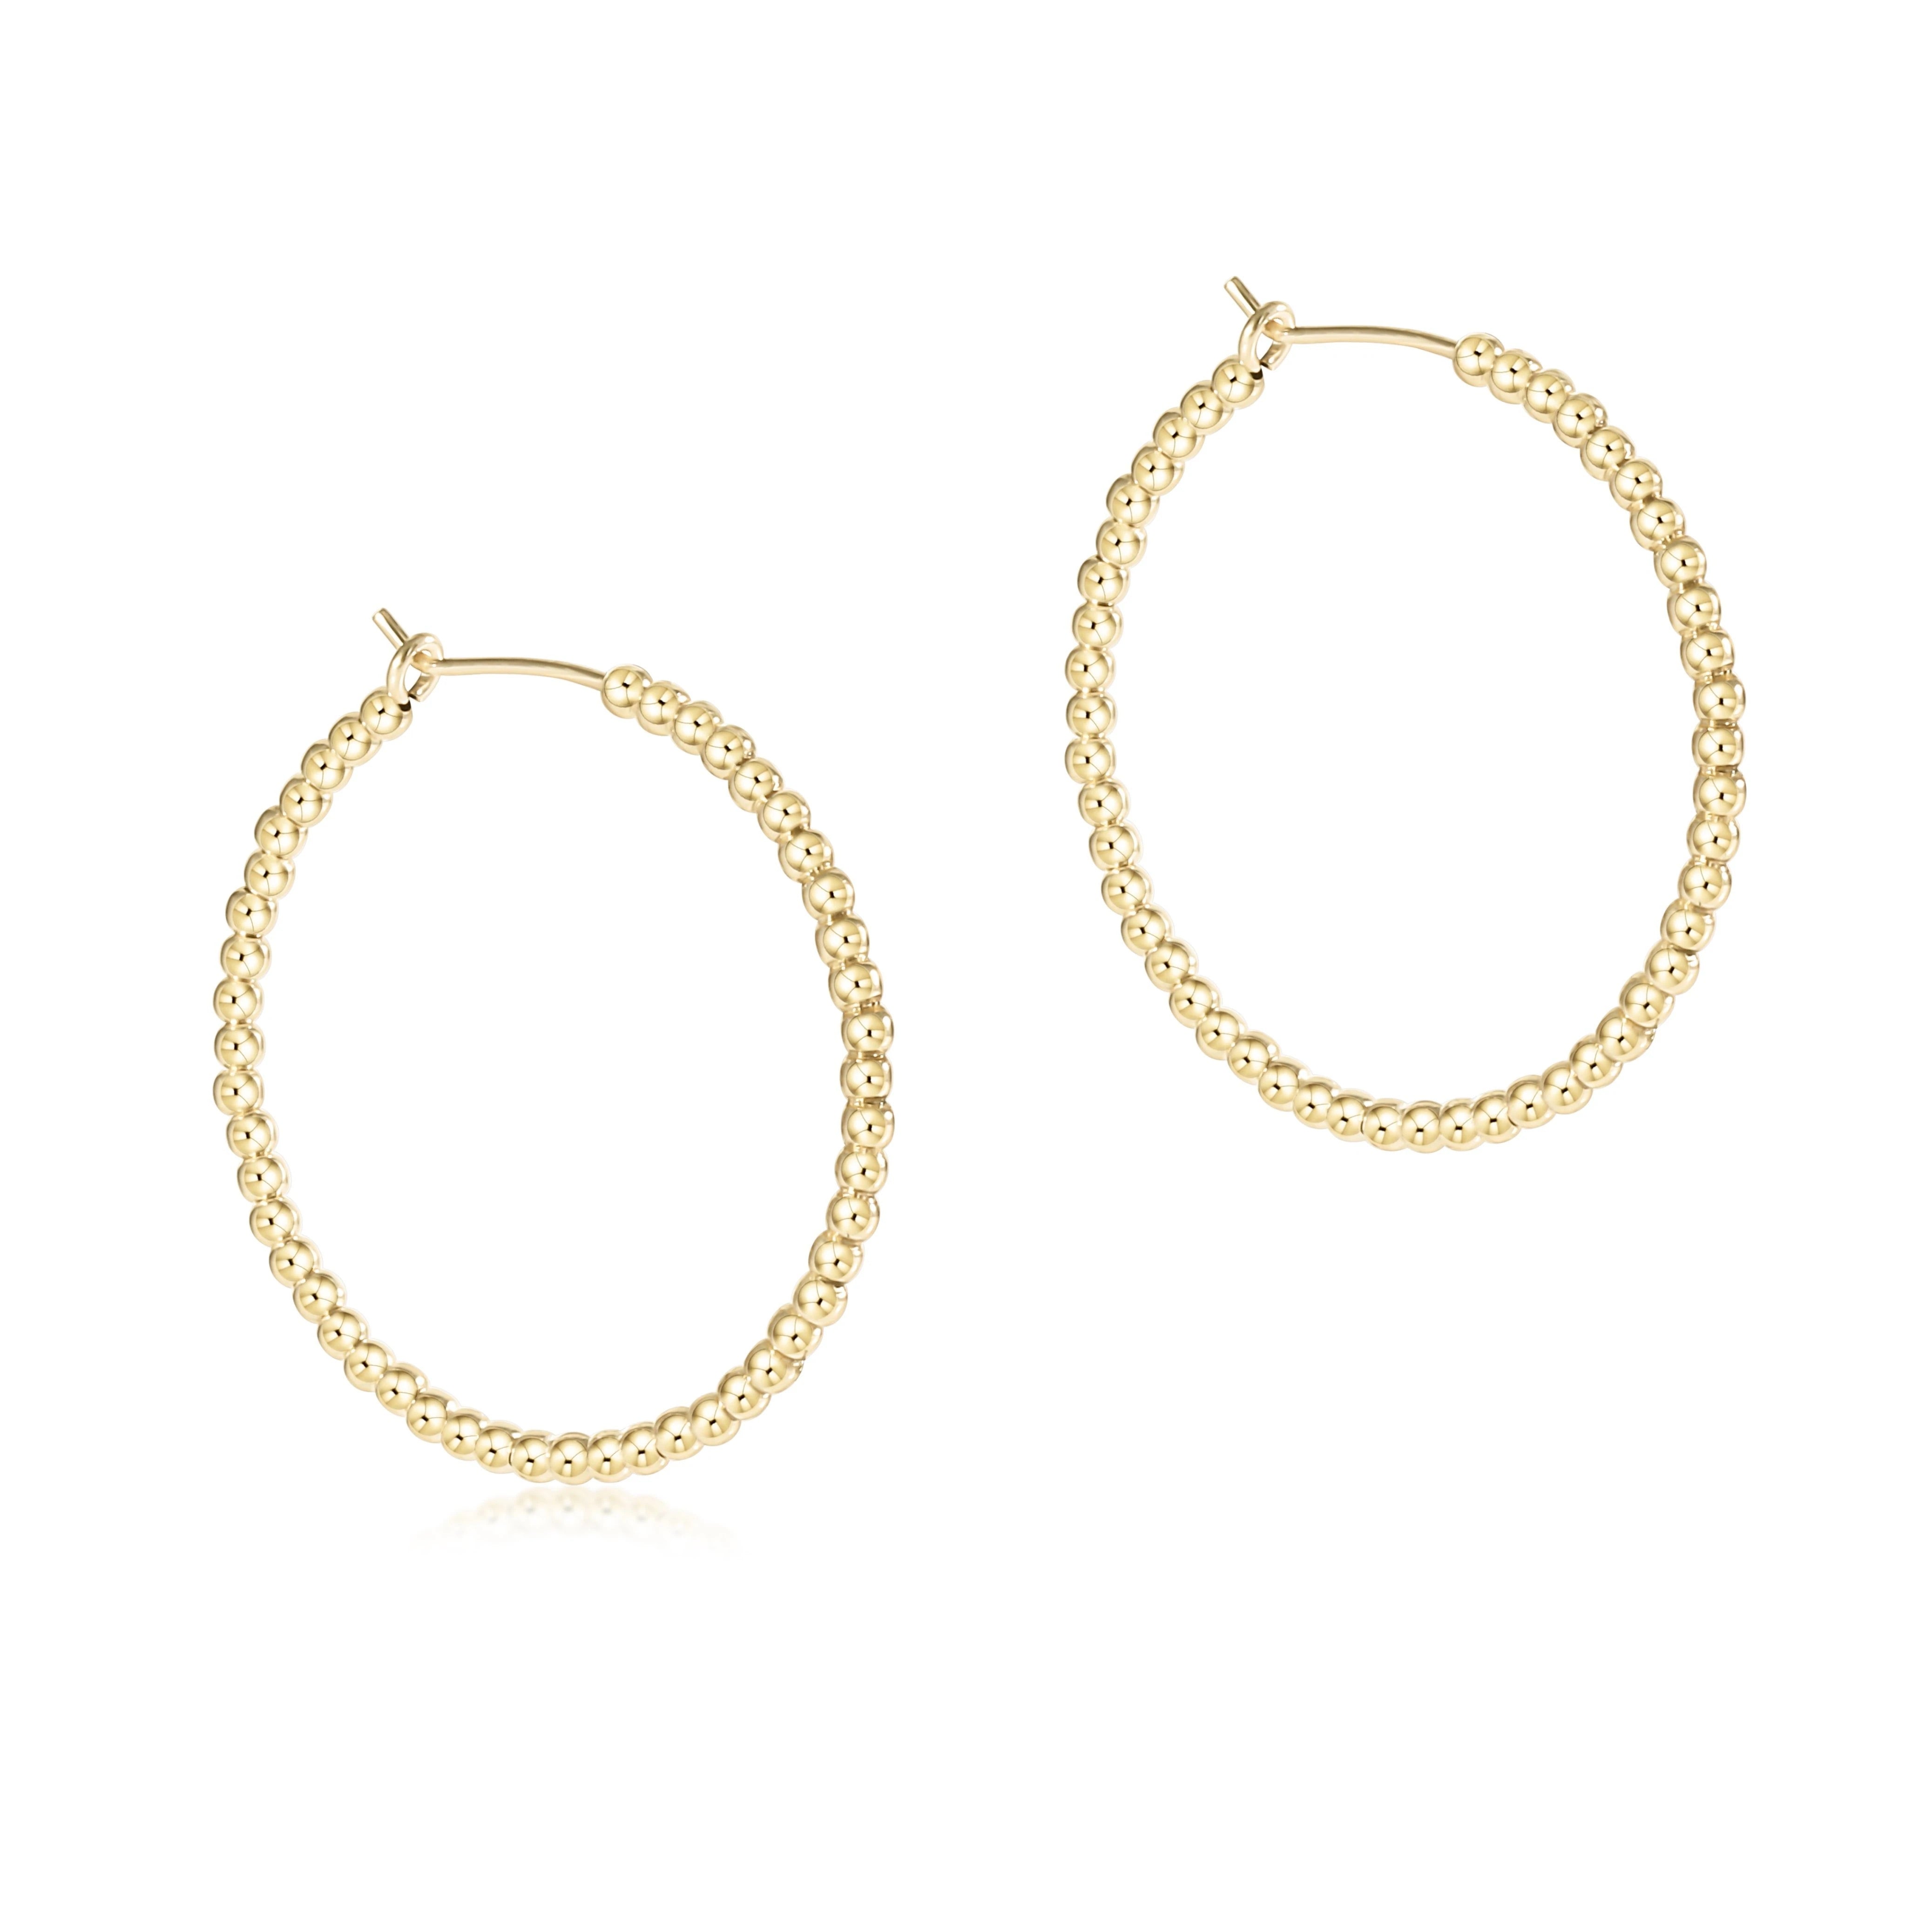 Beaded Gold Hoop-Earrings-The Lovely Closet-The Lovely Closet, Women's Fashion Boutique in Alexandria, KY